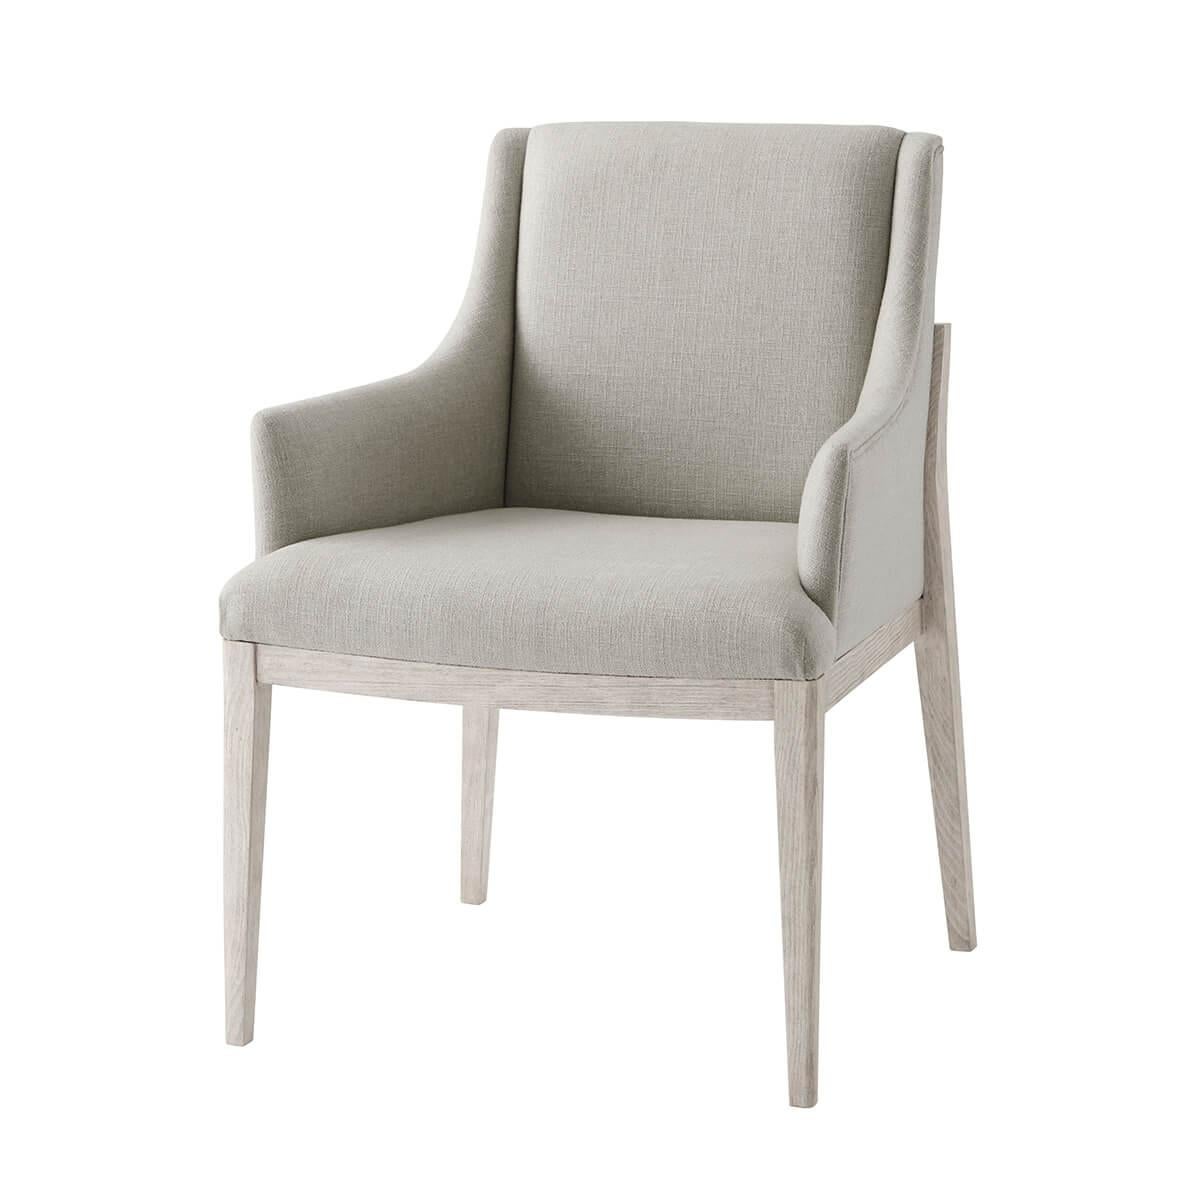 with a brushed beech frame in a light gowan finish, with a performance fabric upholstered backrest, seat and arms, raised on tapered legs.

Dimensions: 24.5